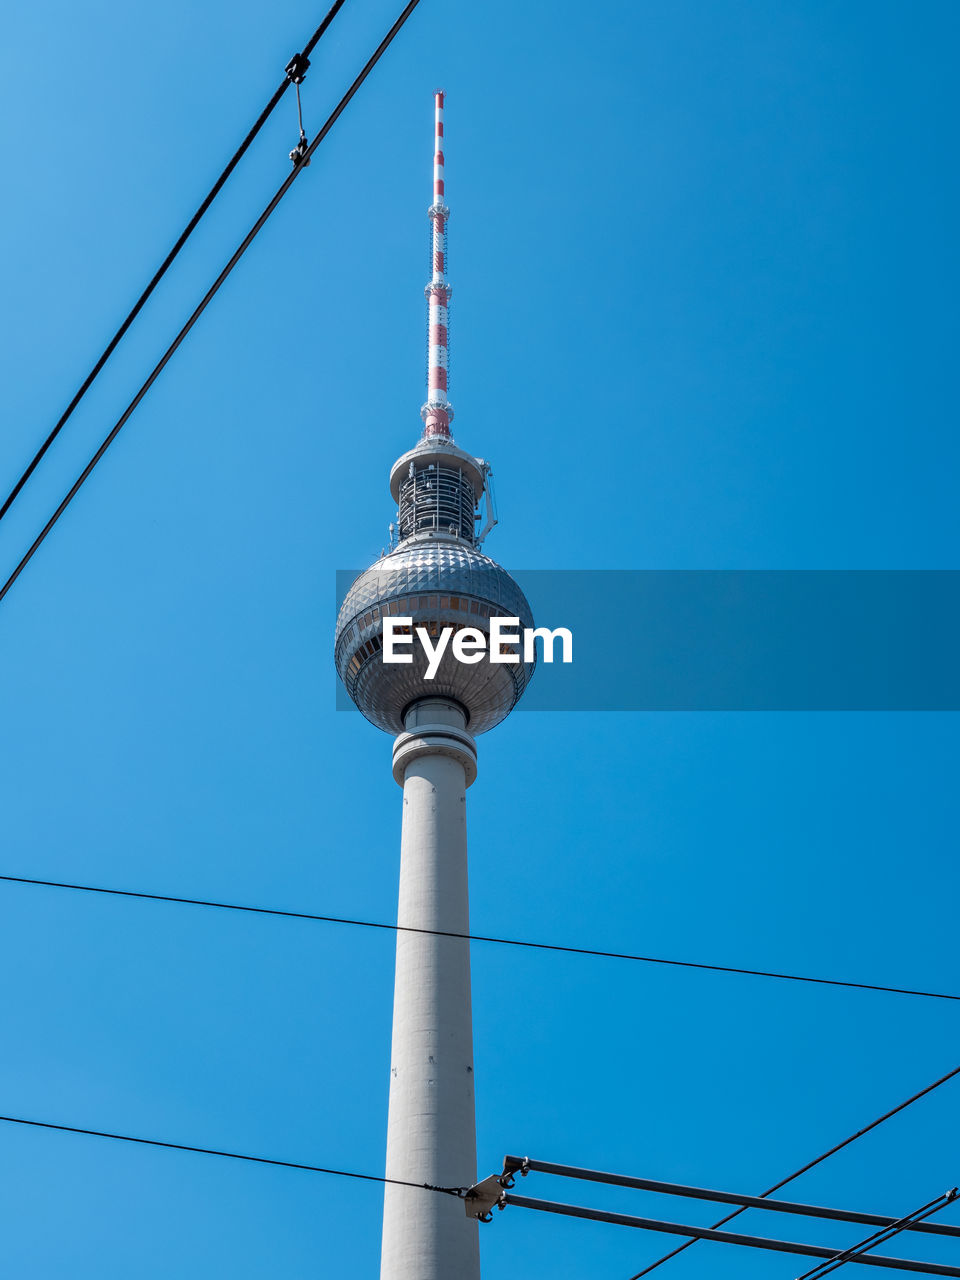 LOW ANGLE VIEW OF COMMUNICATIONS TOWER AGAINST CLEAR BLUE SKY